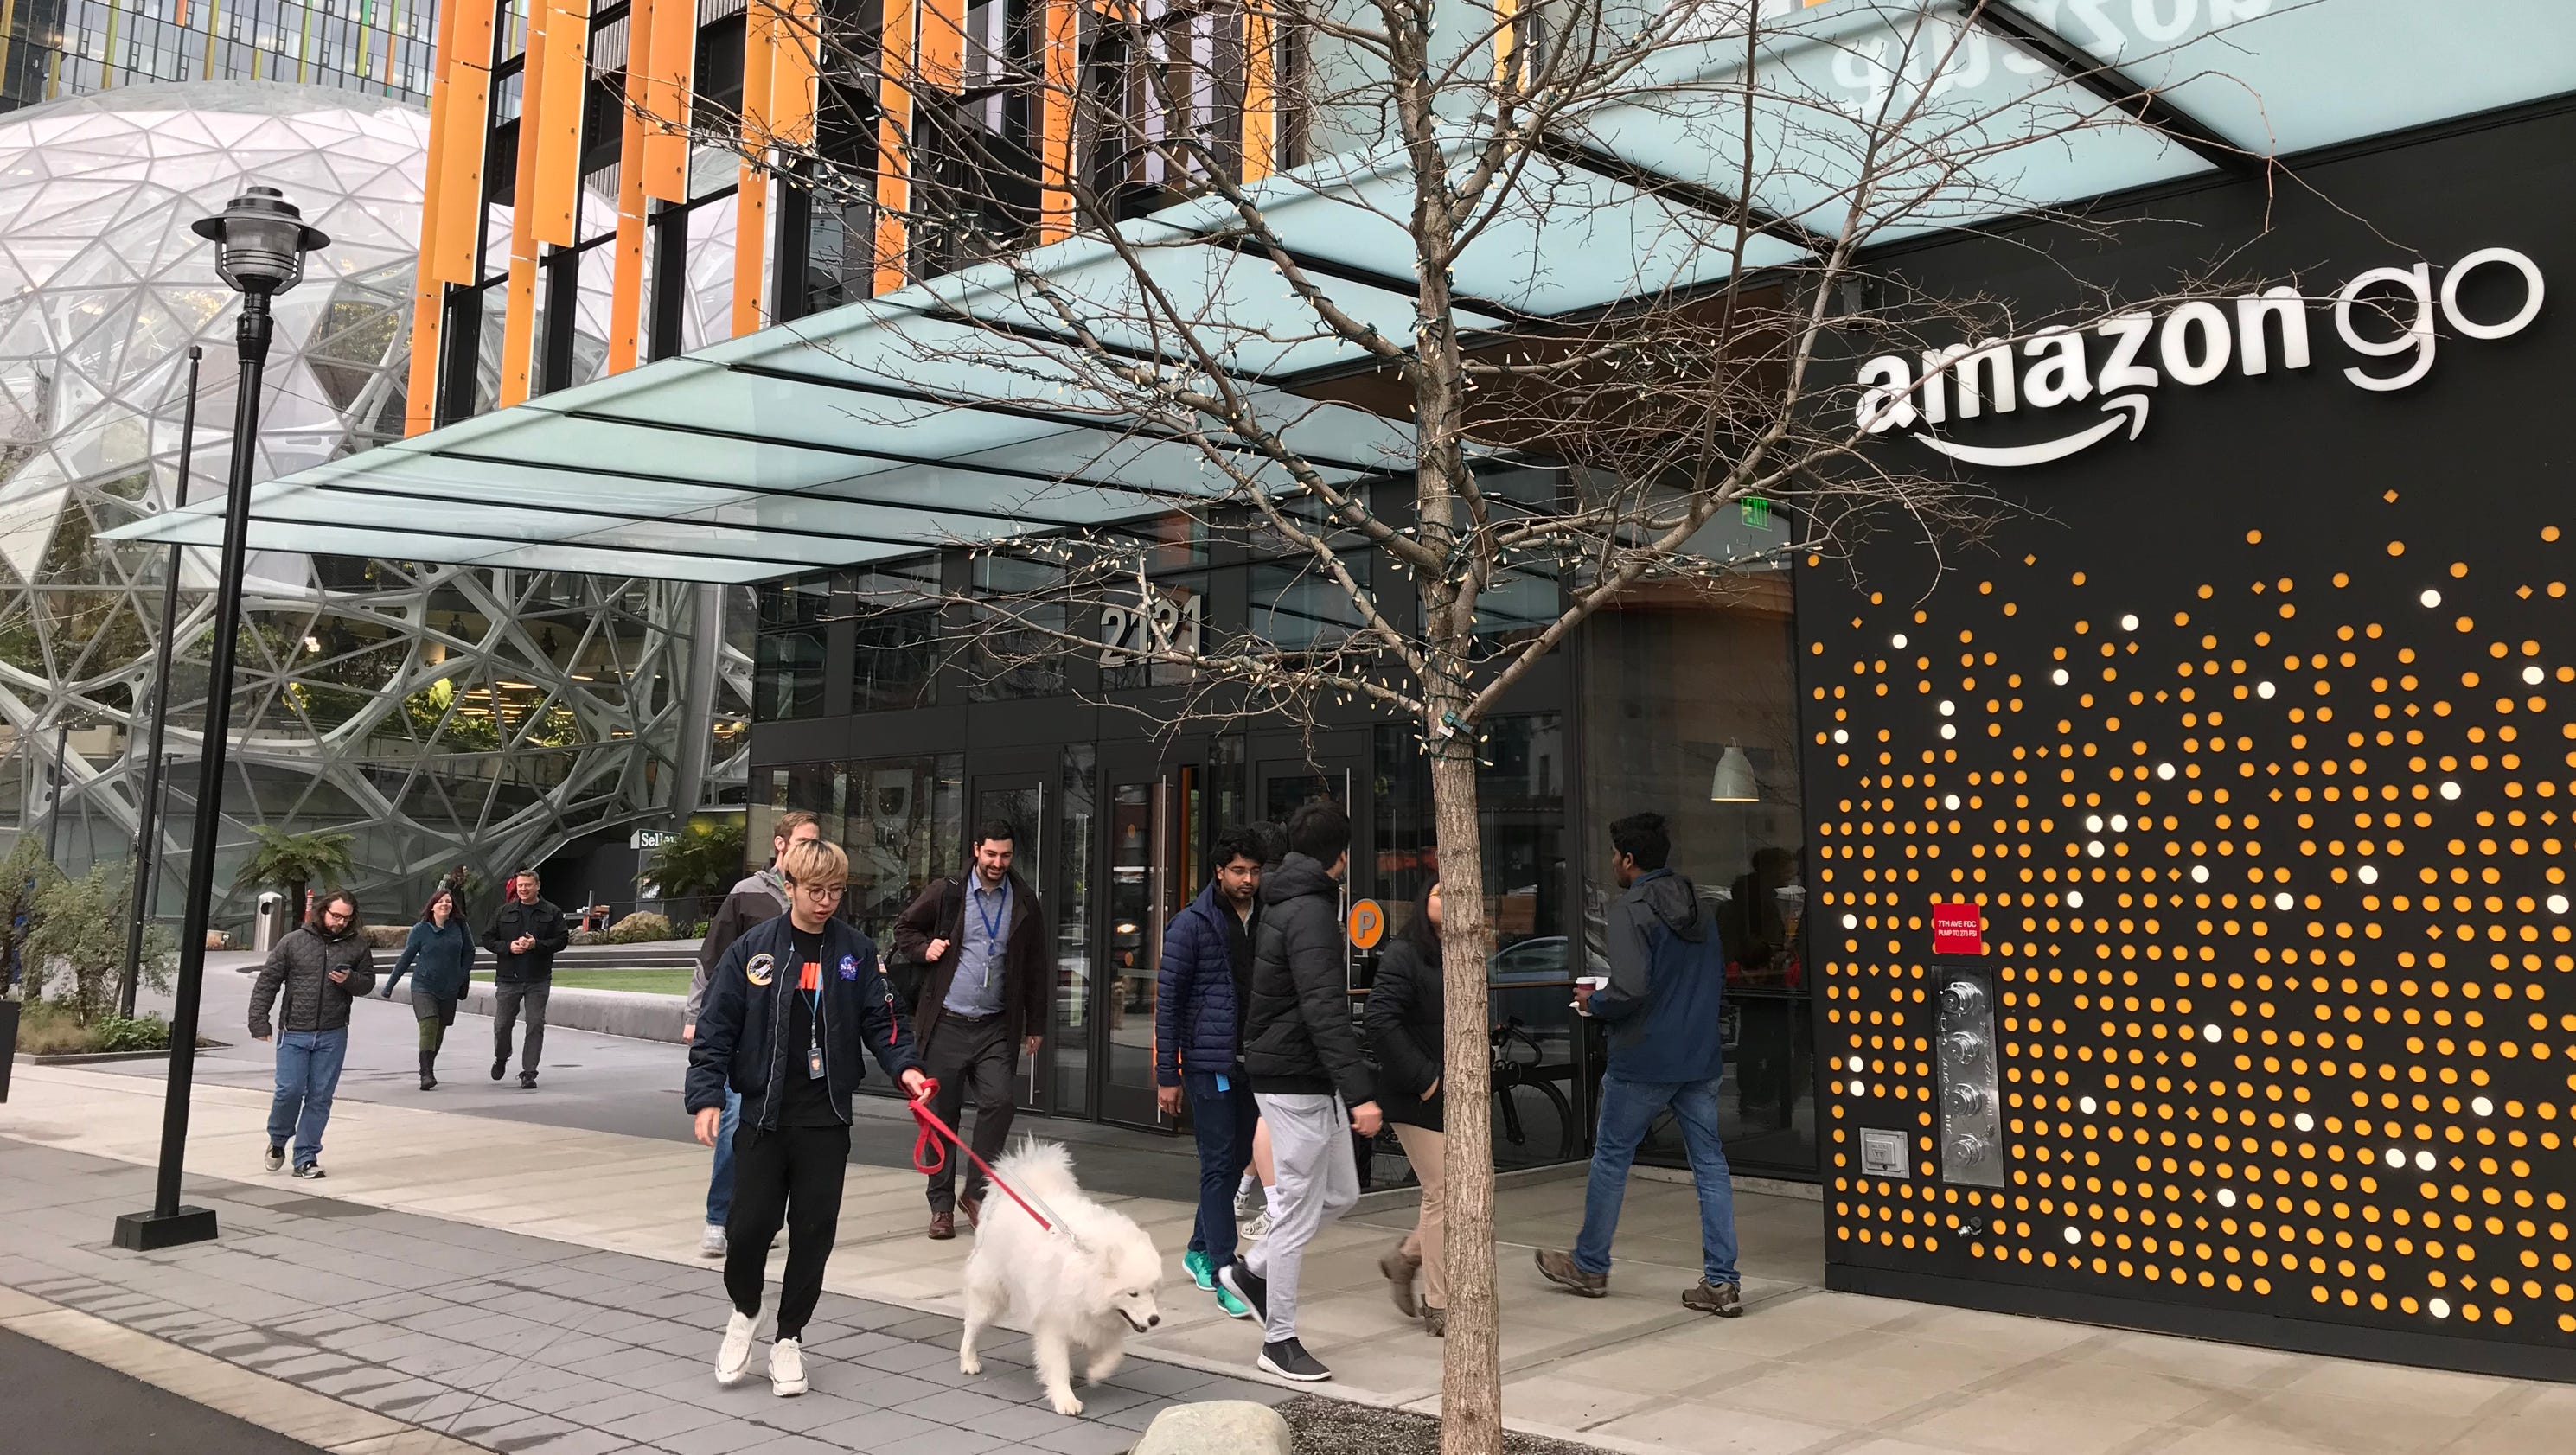 Amazon Go, a checkout-free grocery store, opens to the public